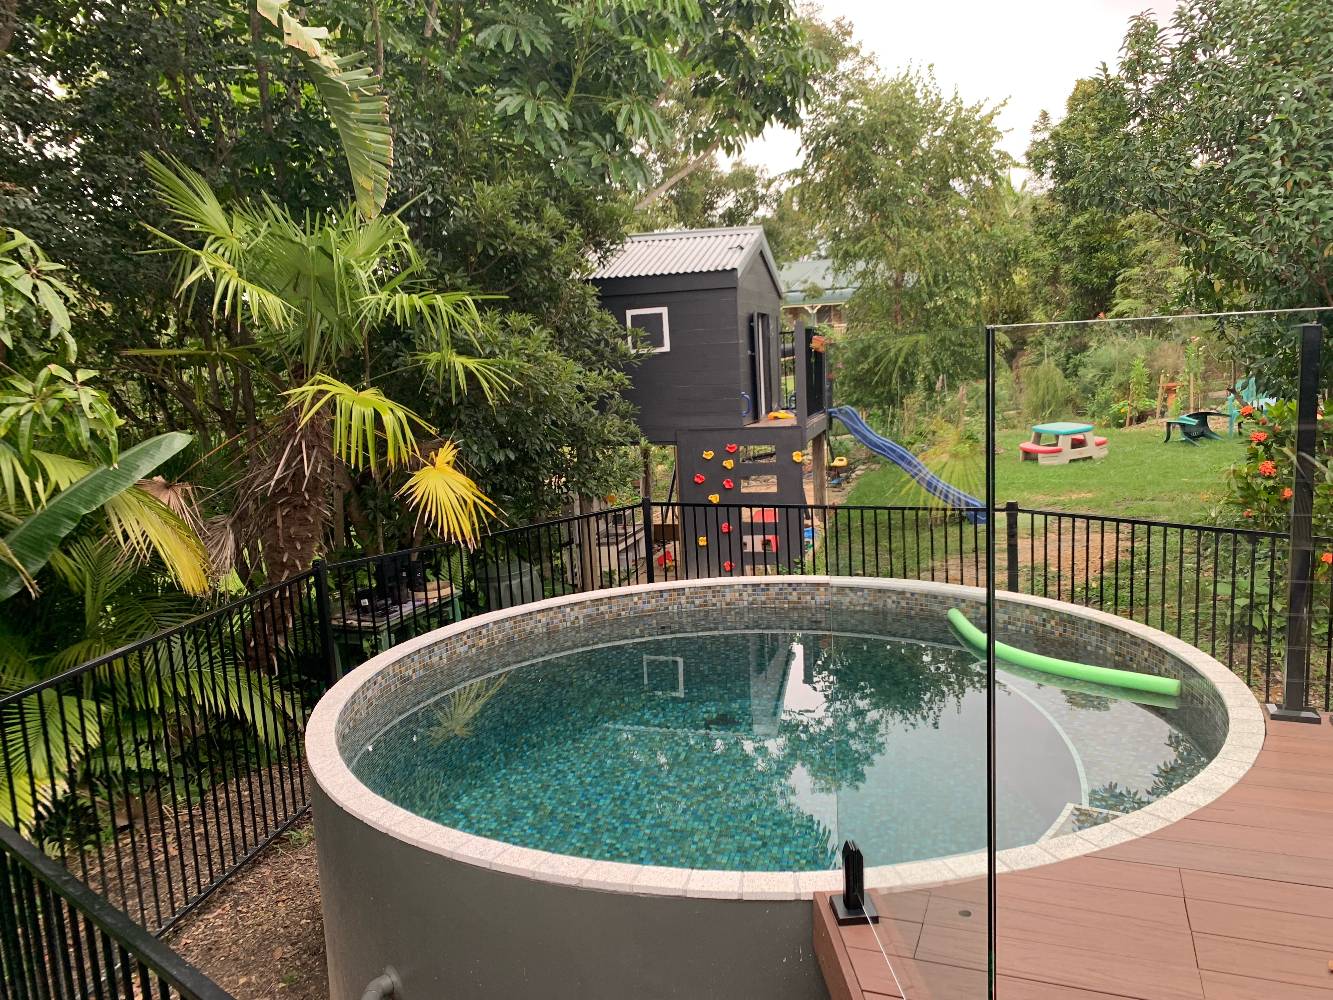 Plunge pool and kids cubby